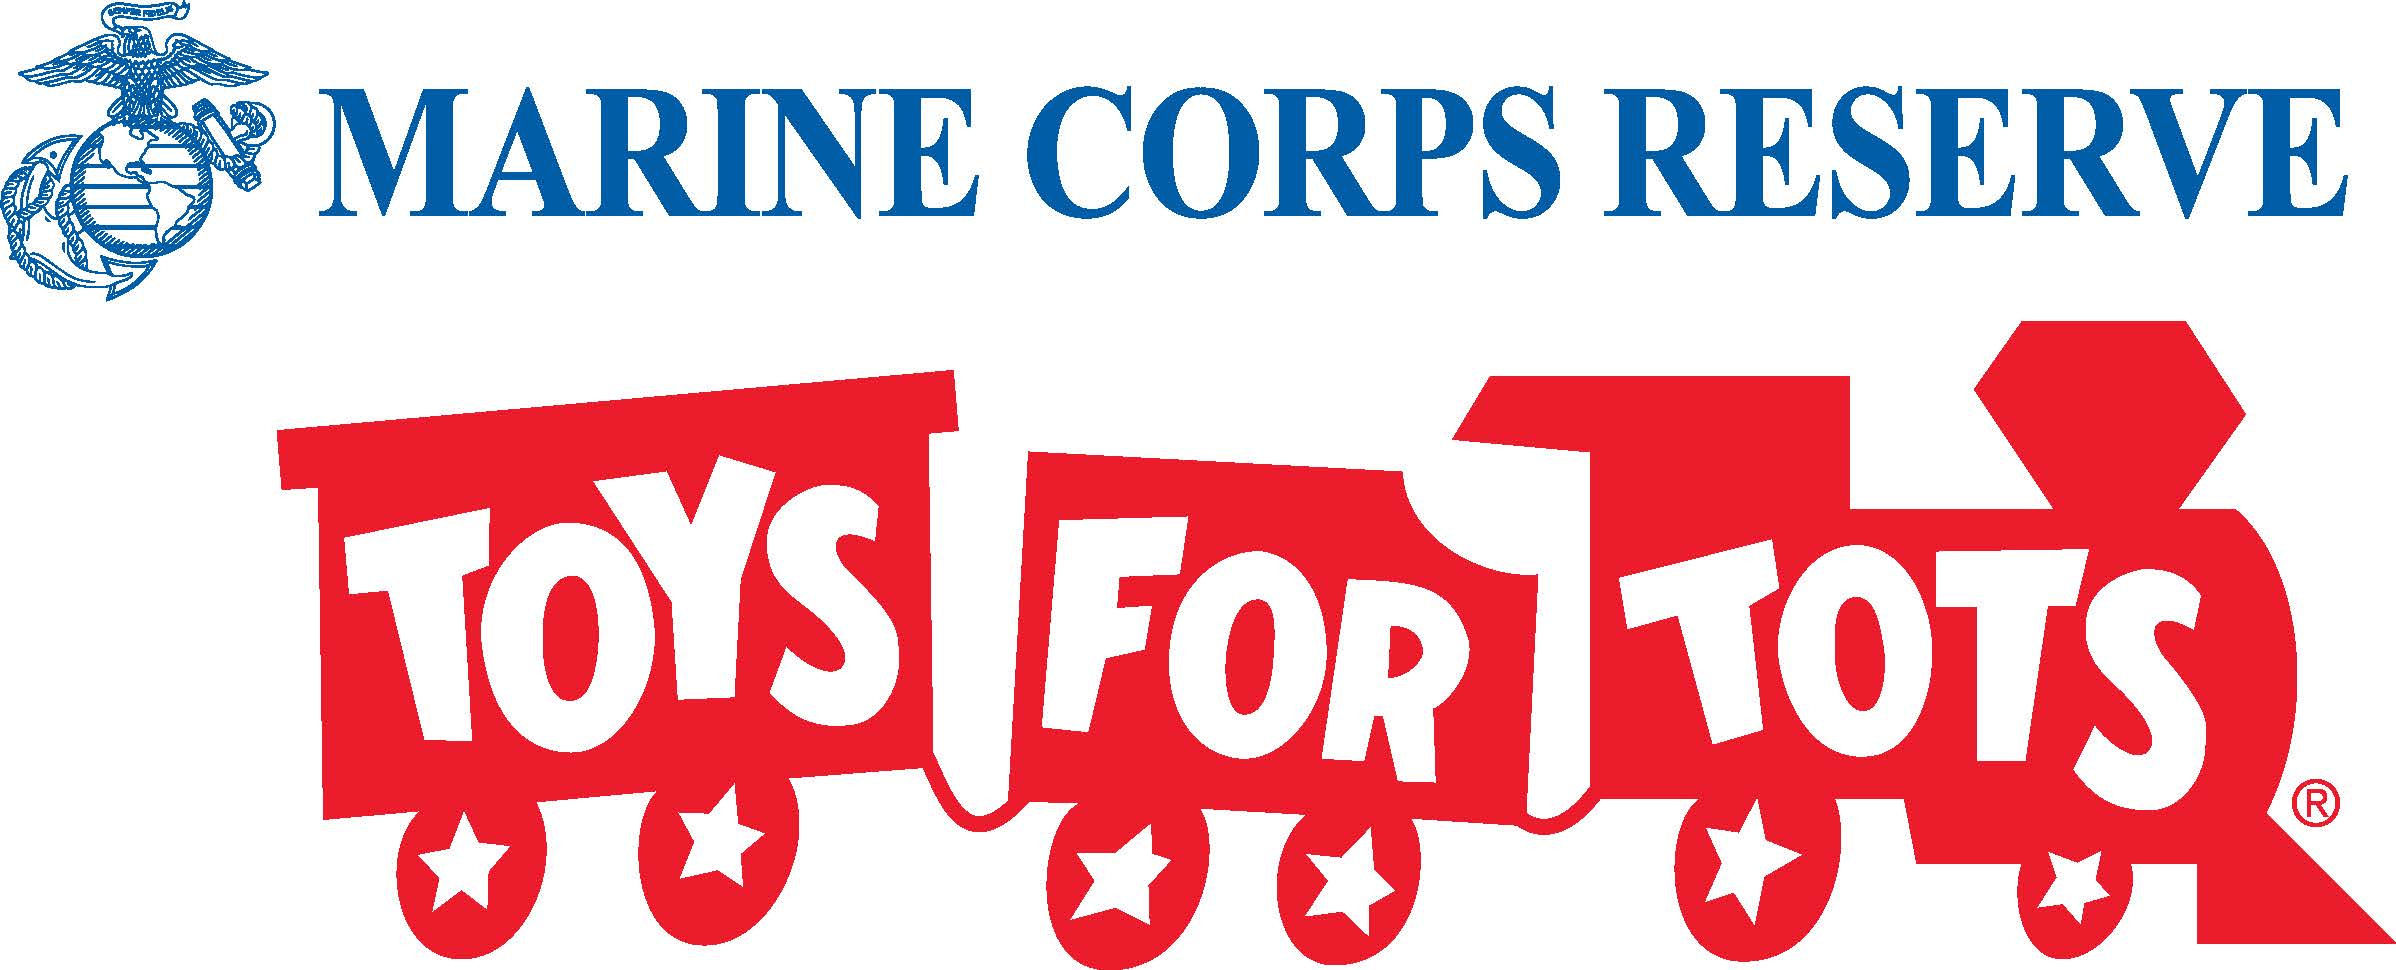 marine-corps-reserve-toys-for-tots-logo.jpg